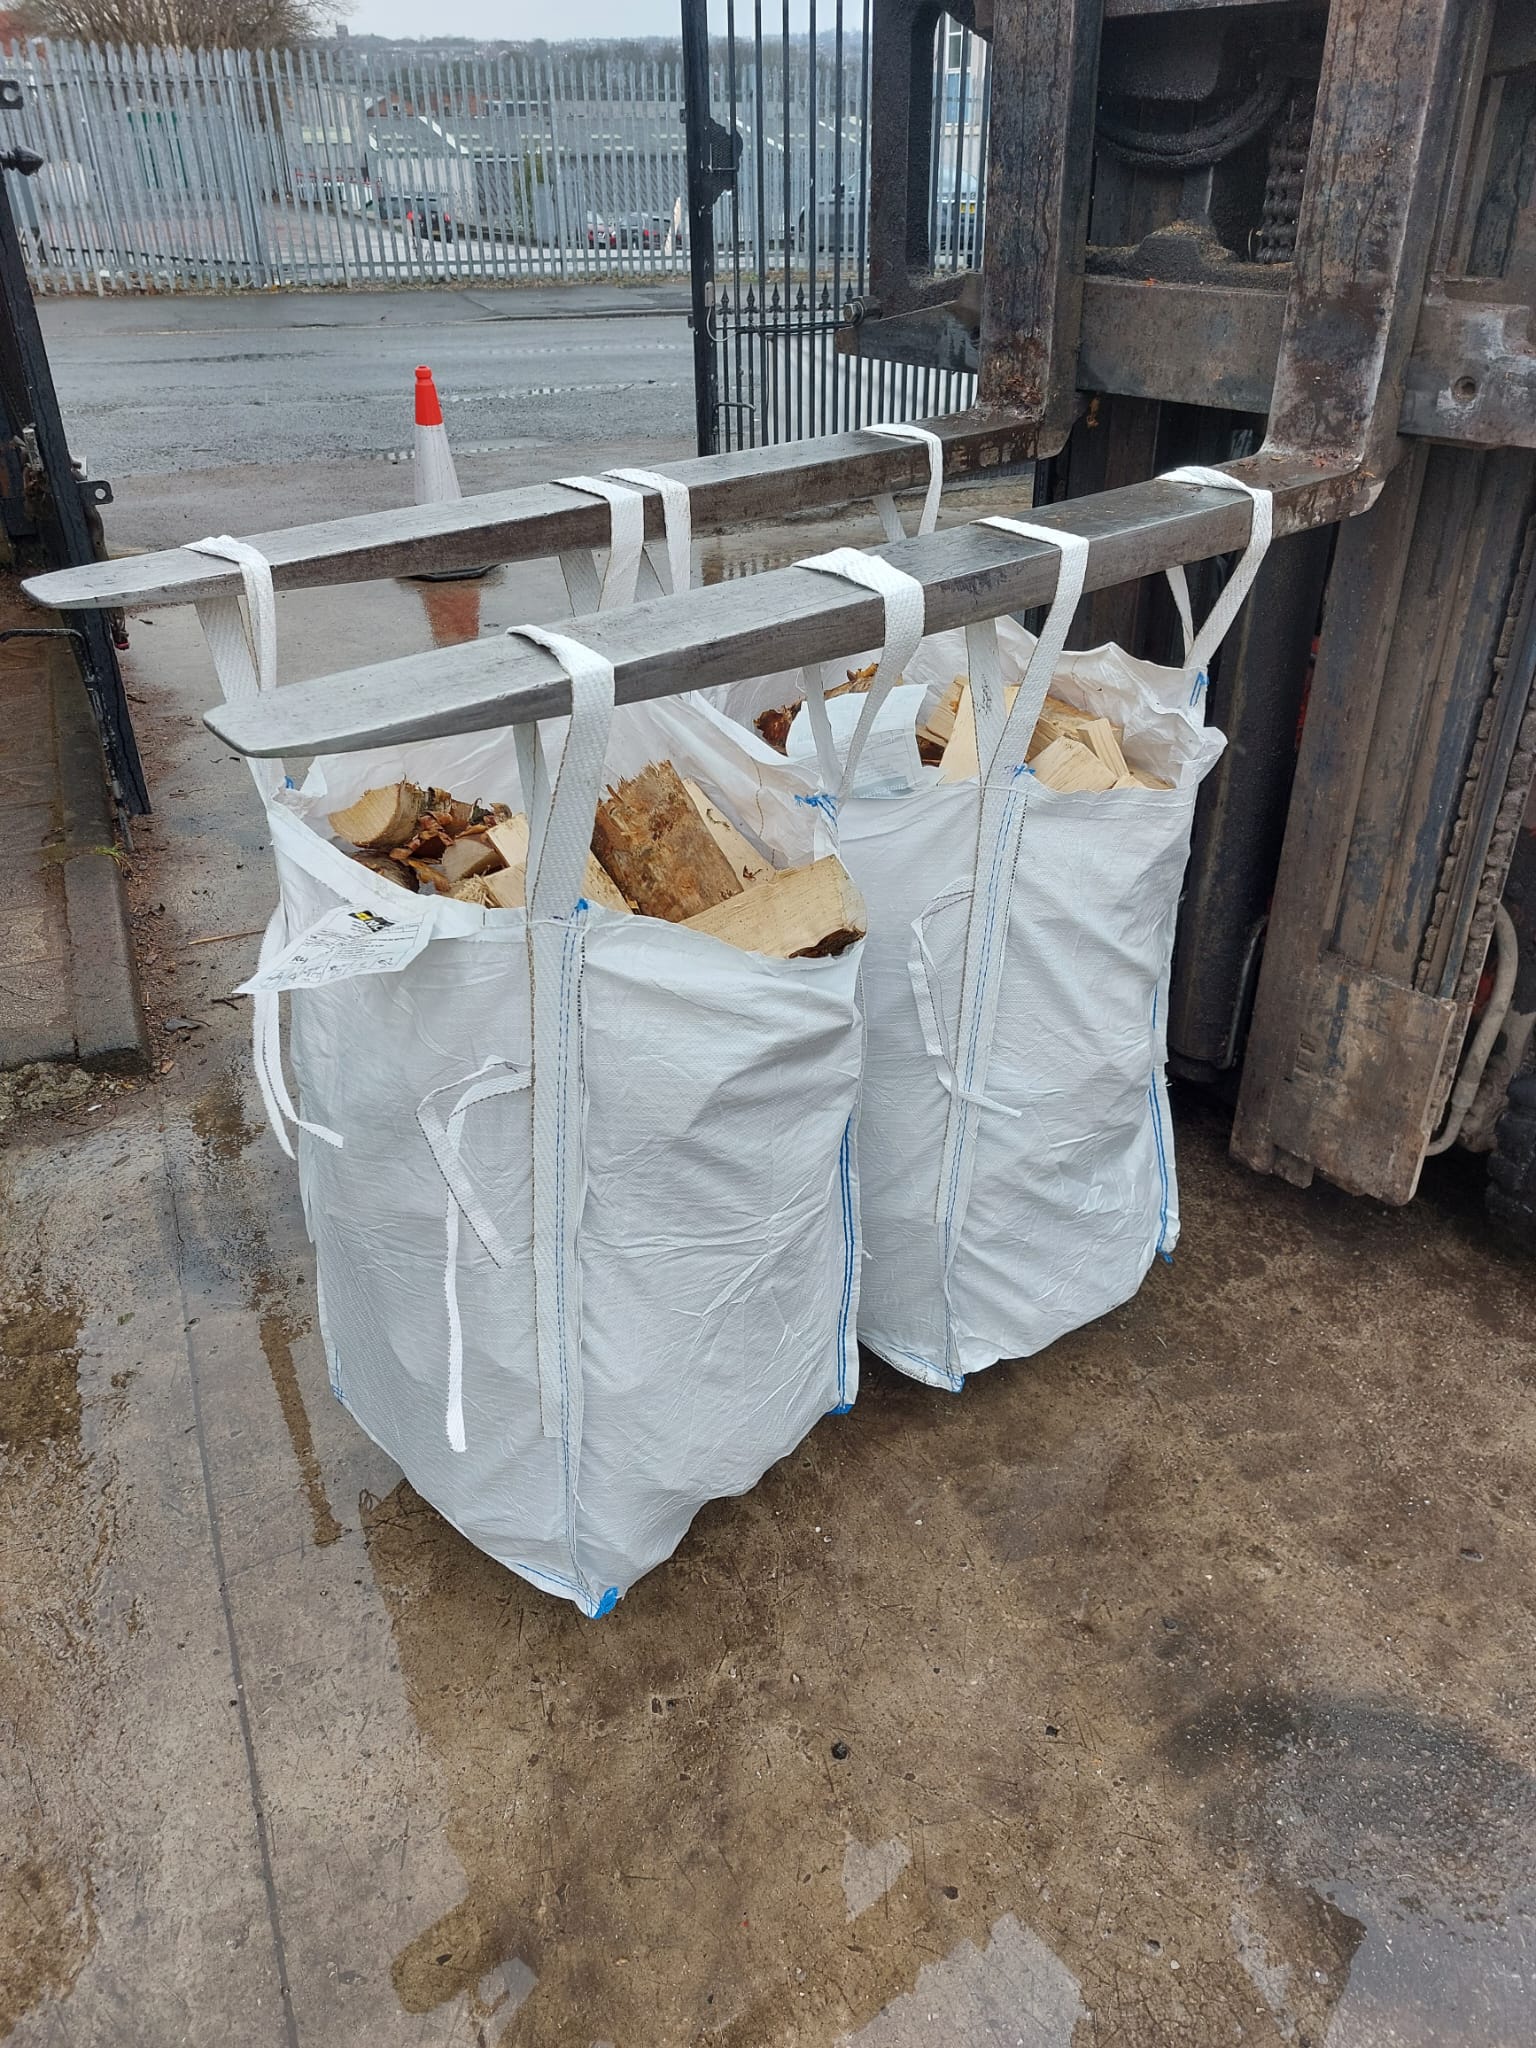 this is a photo of 'barrow bags of firewood'